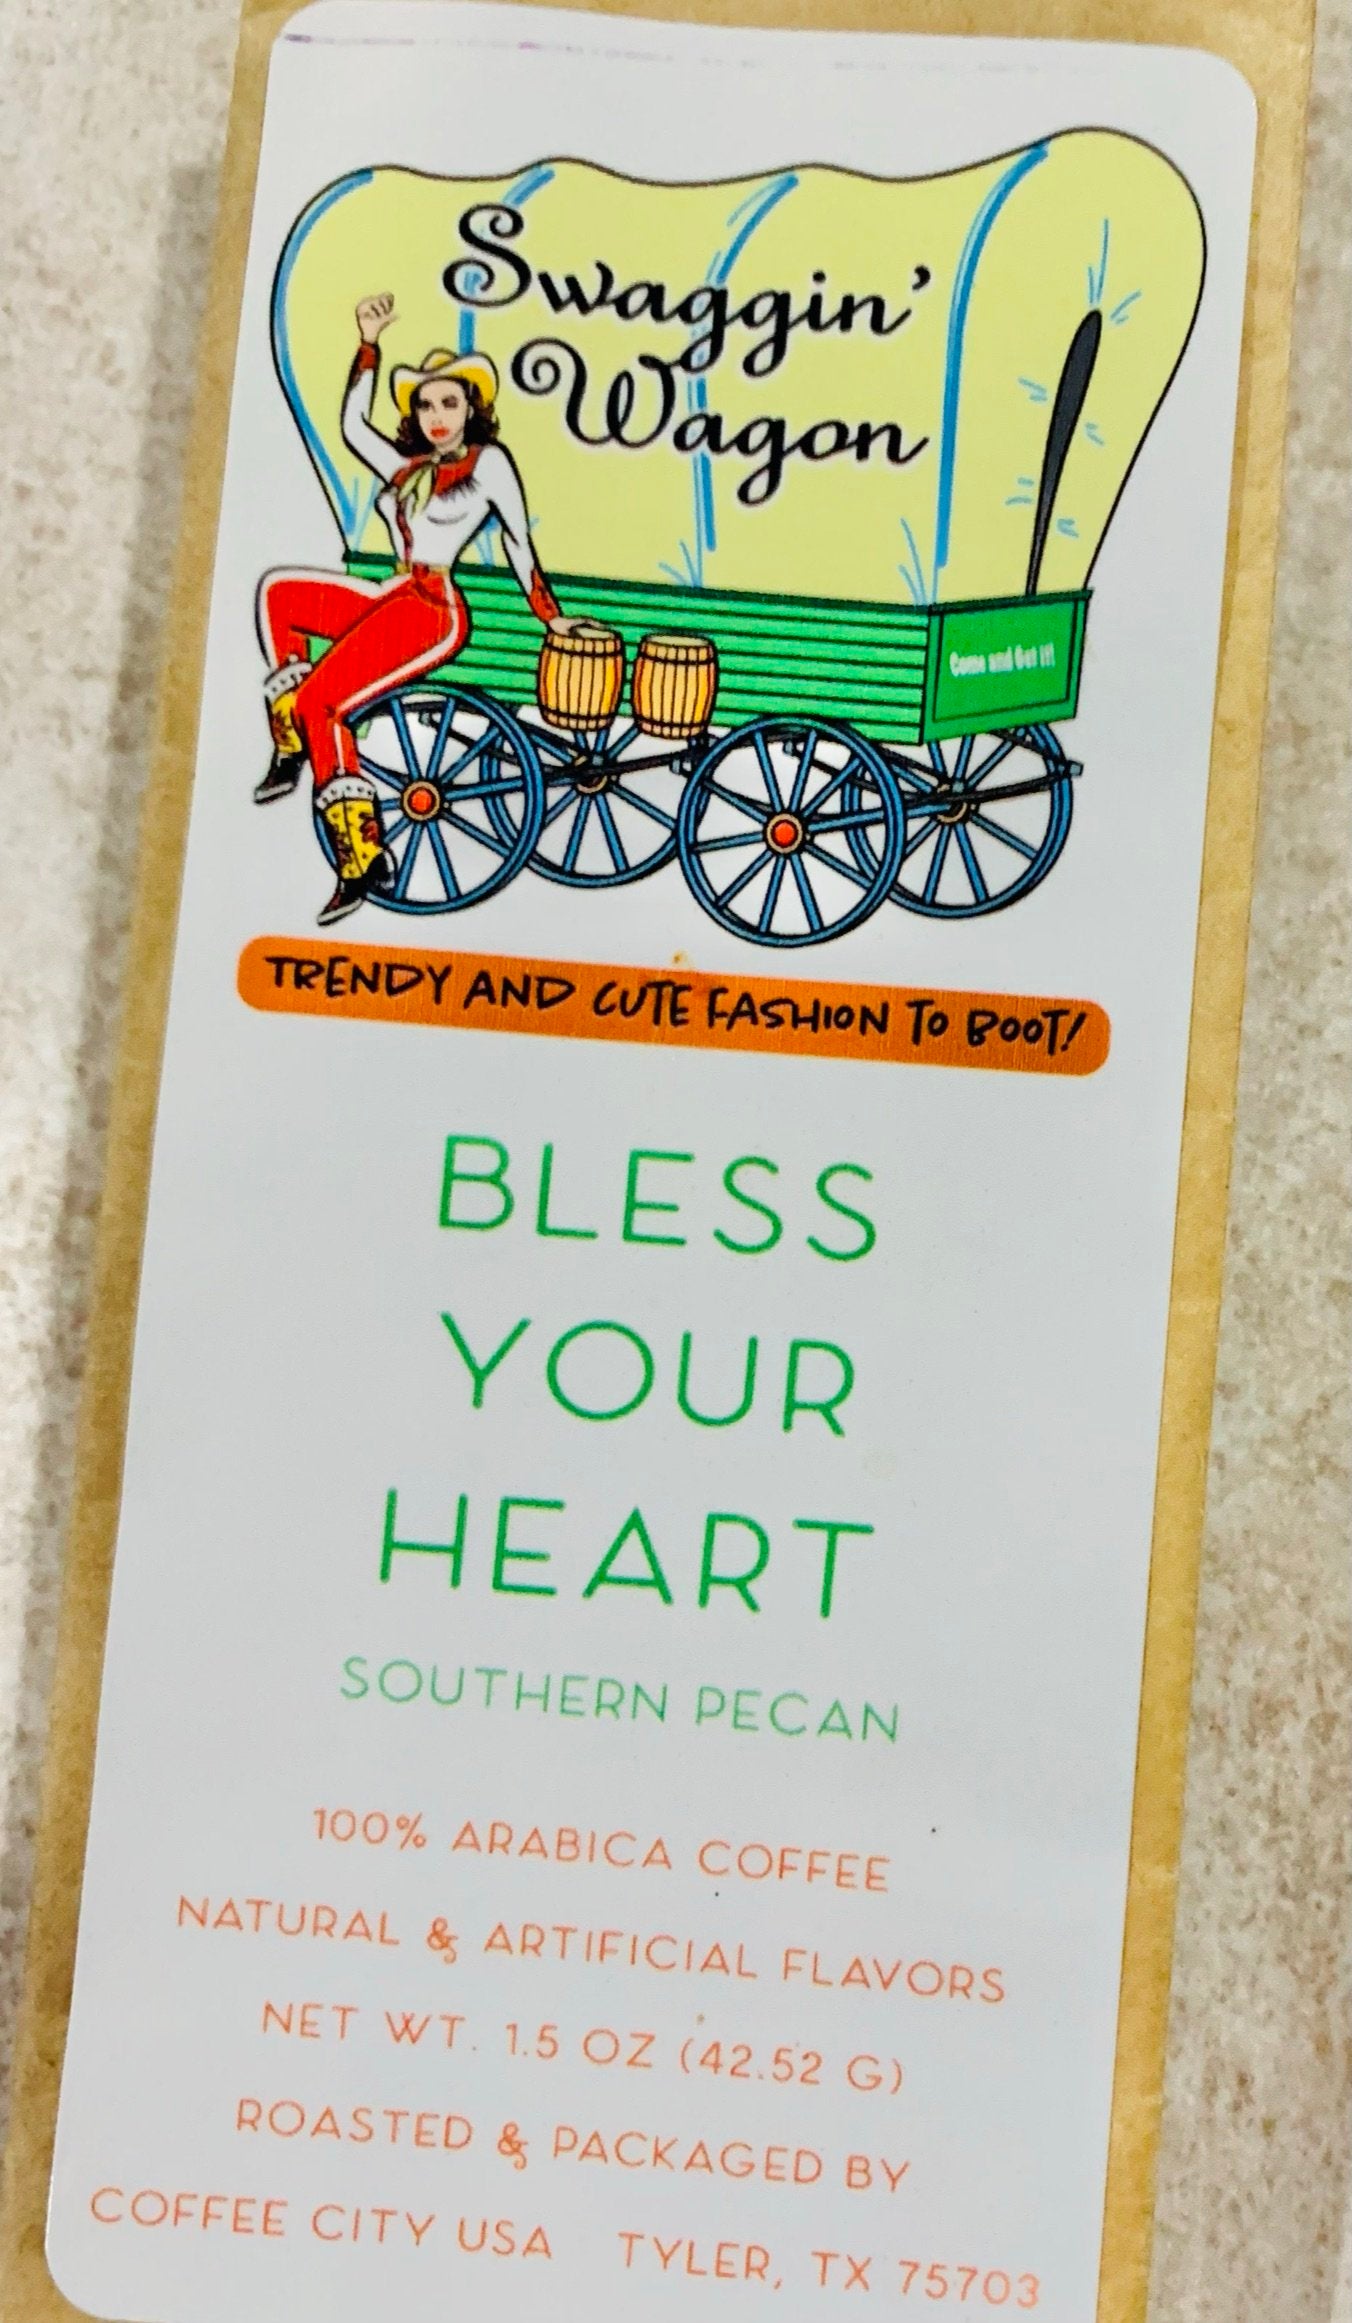 Bless Your Heart Gourmet Coffee (1.5 oz.) (southern pecan)